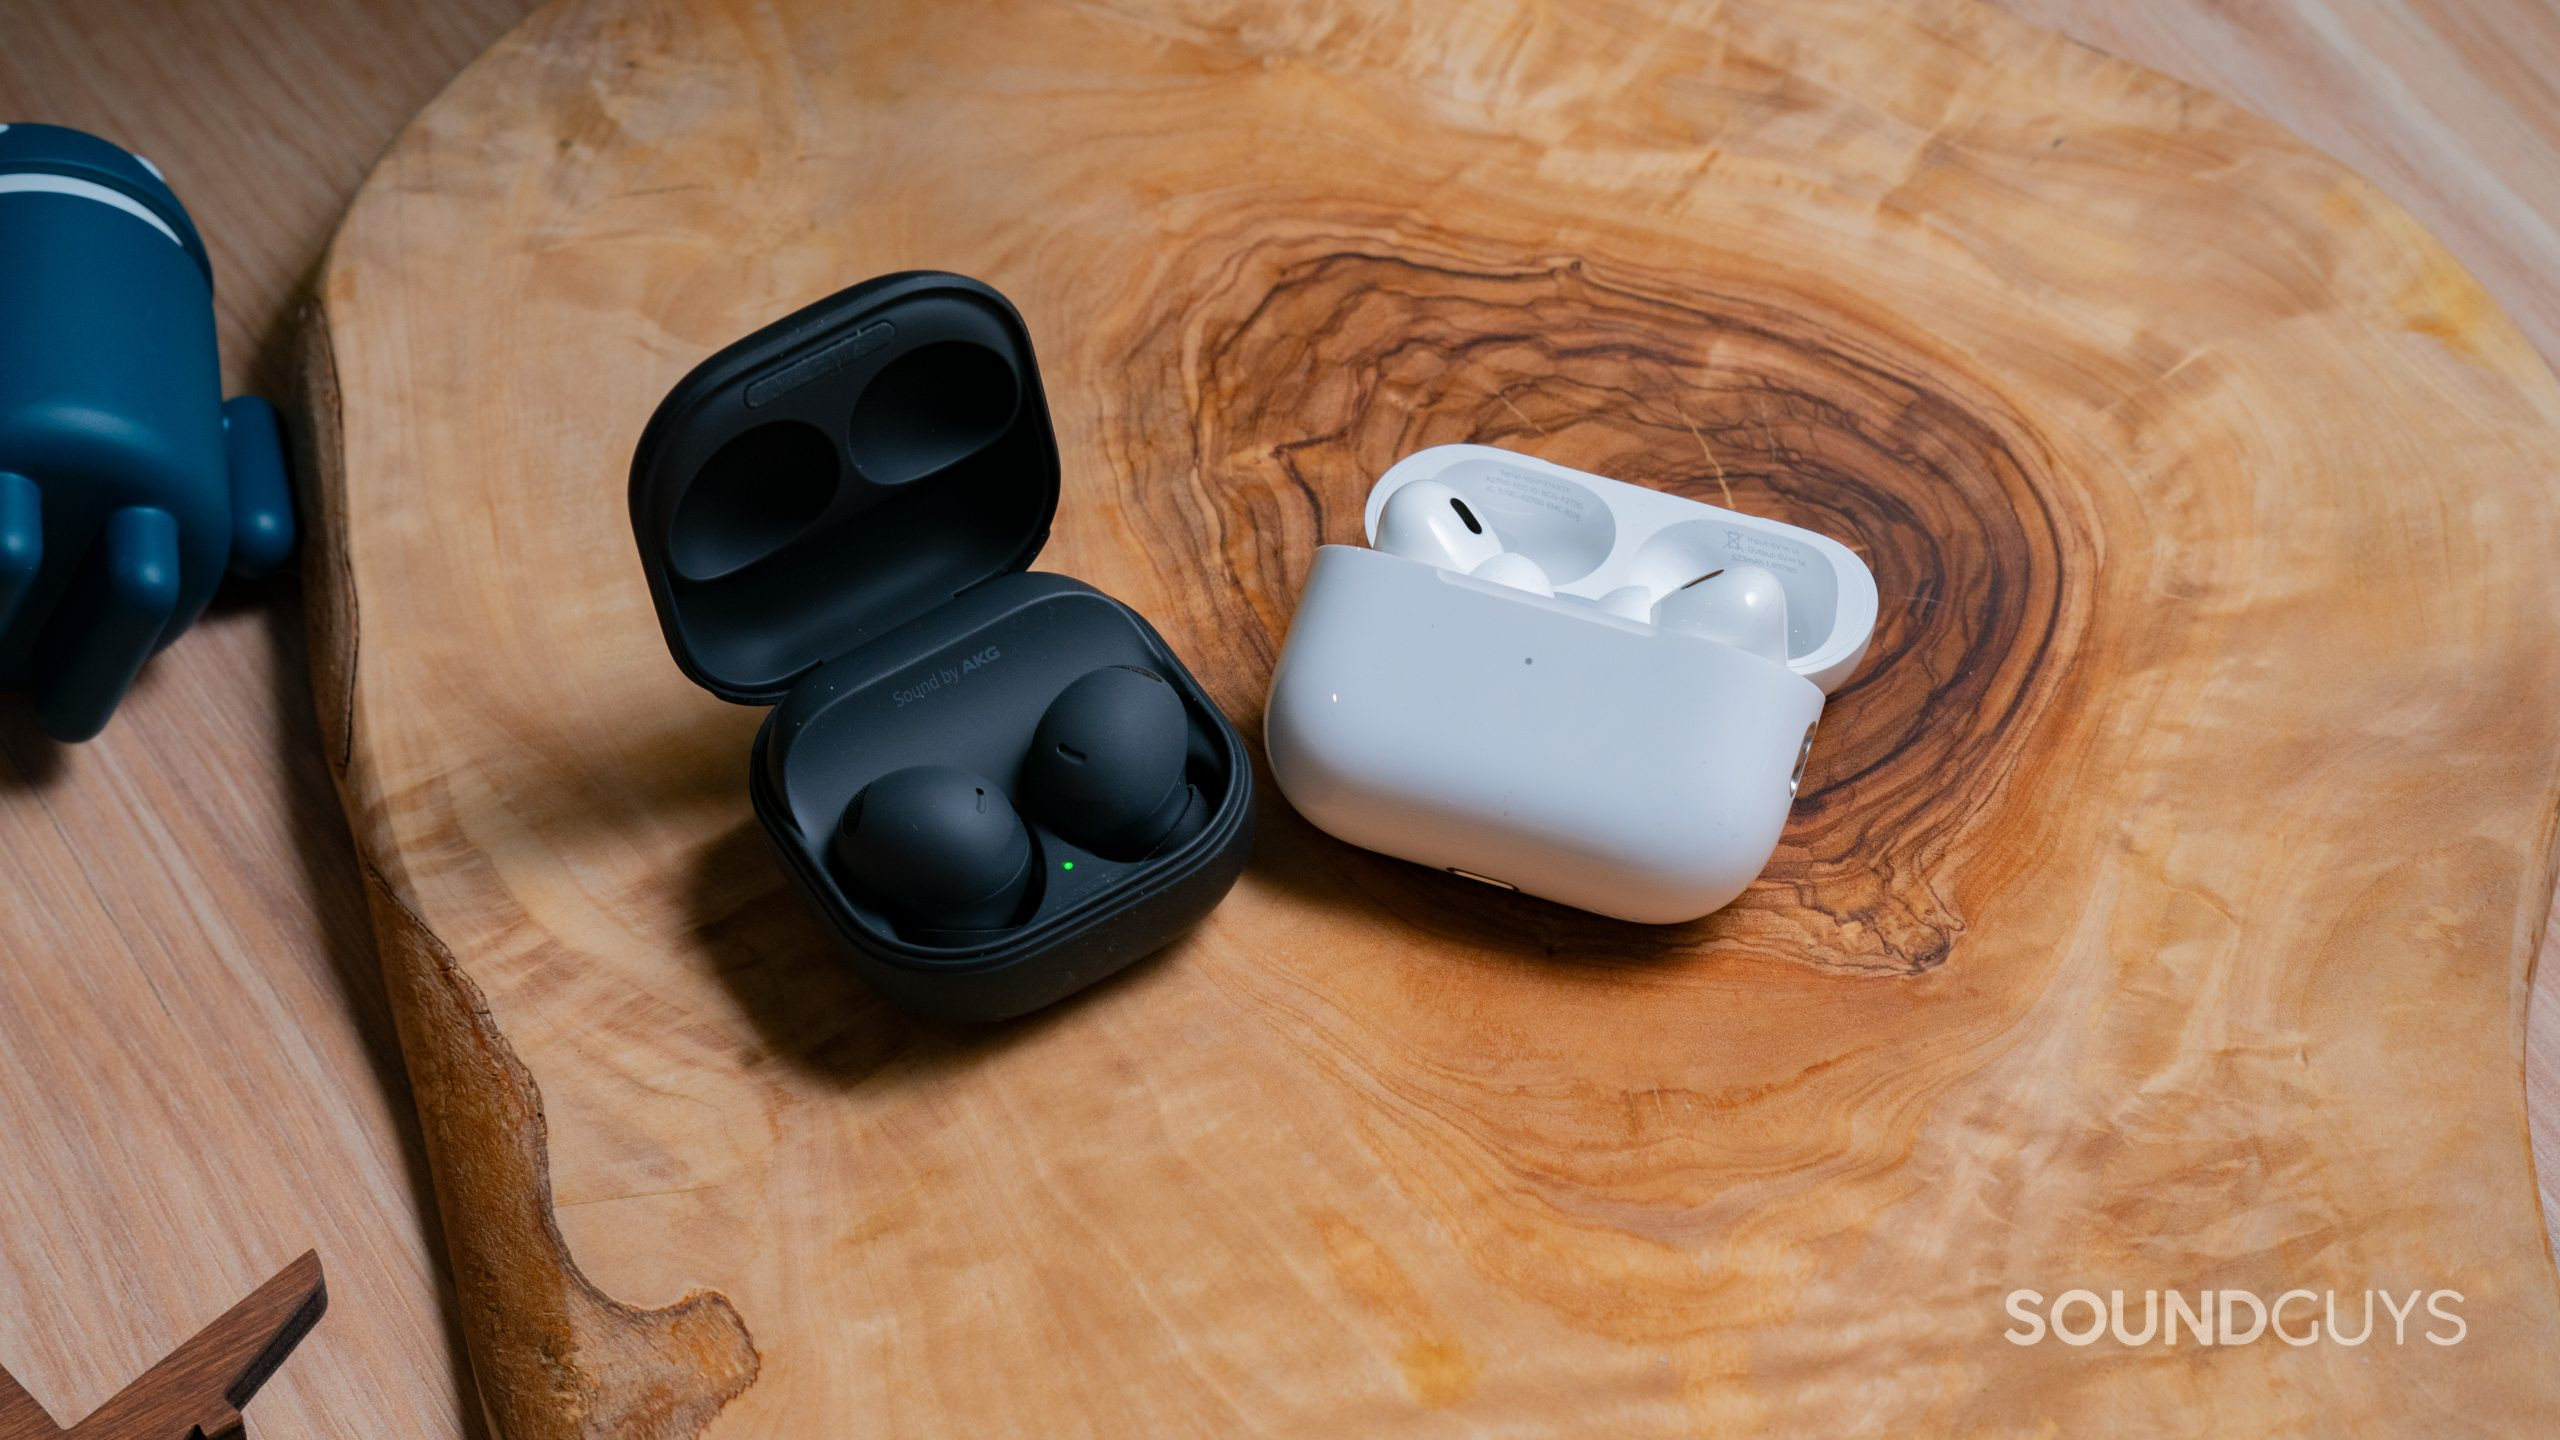 The open cases of the Samsung Galaxy Buds 2 Pro sit next to the Apple AirPods Pro (2nd generation) on a wood surface.